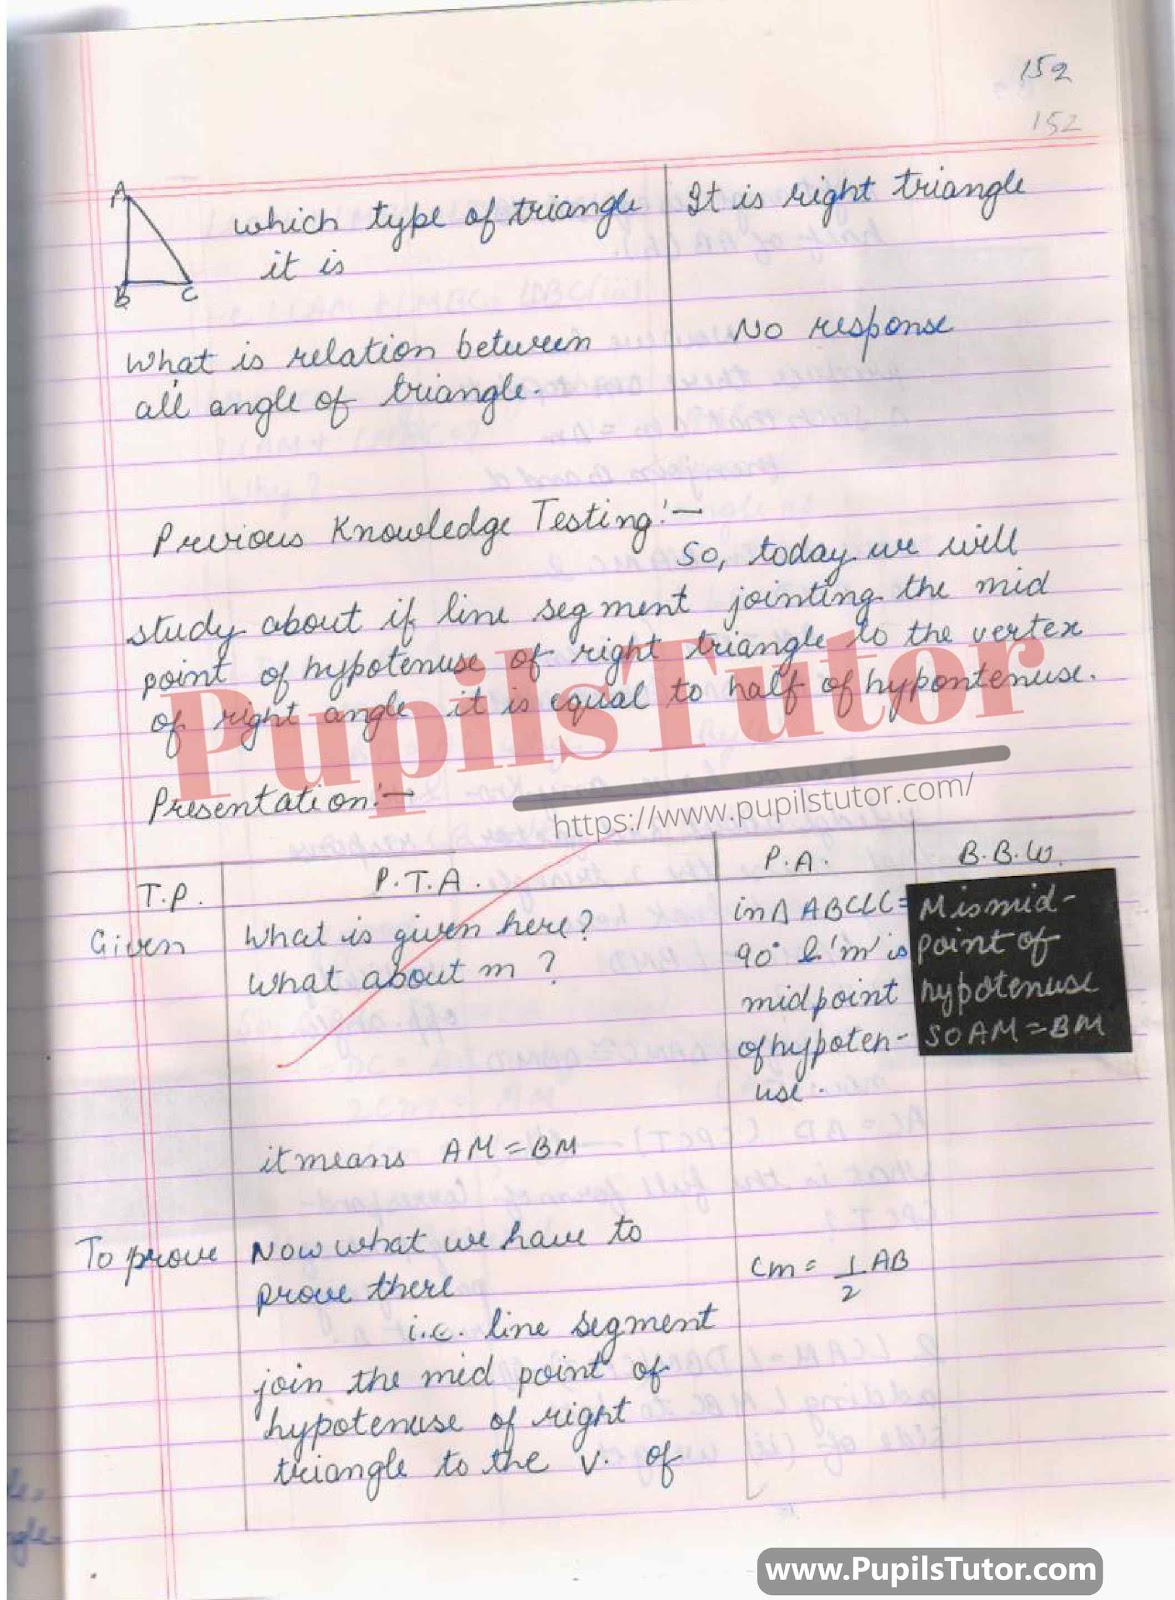 Mathematics Lesson Plan On Theorem For Class/Grade 7th, 8 ,9 Th And 10 For CBSE NCERT School And College Teachers  – (Page And Image Number 3) – www.pupilstutor.com